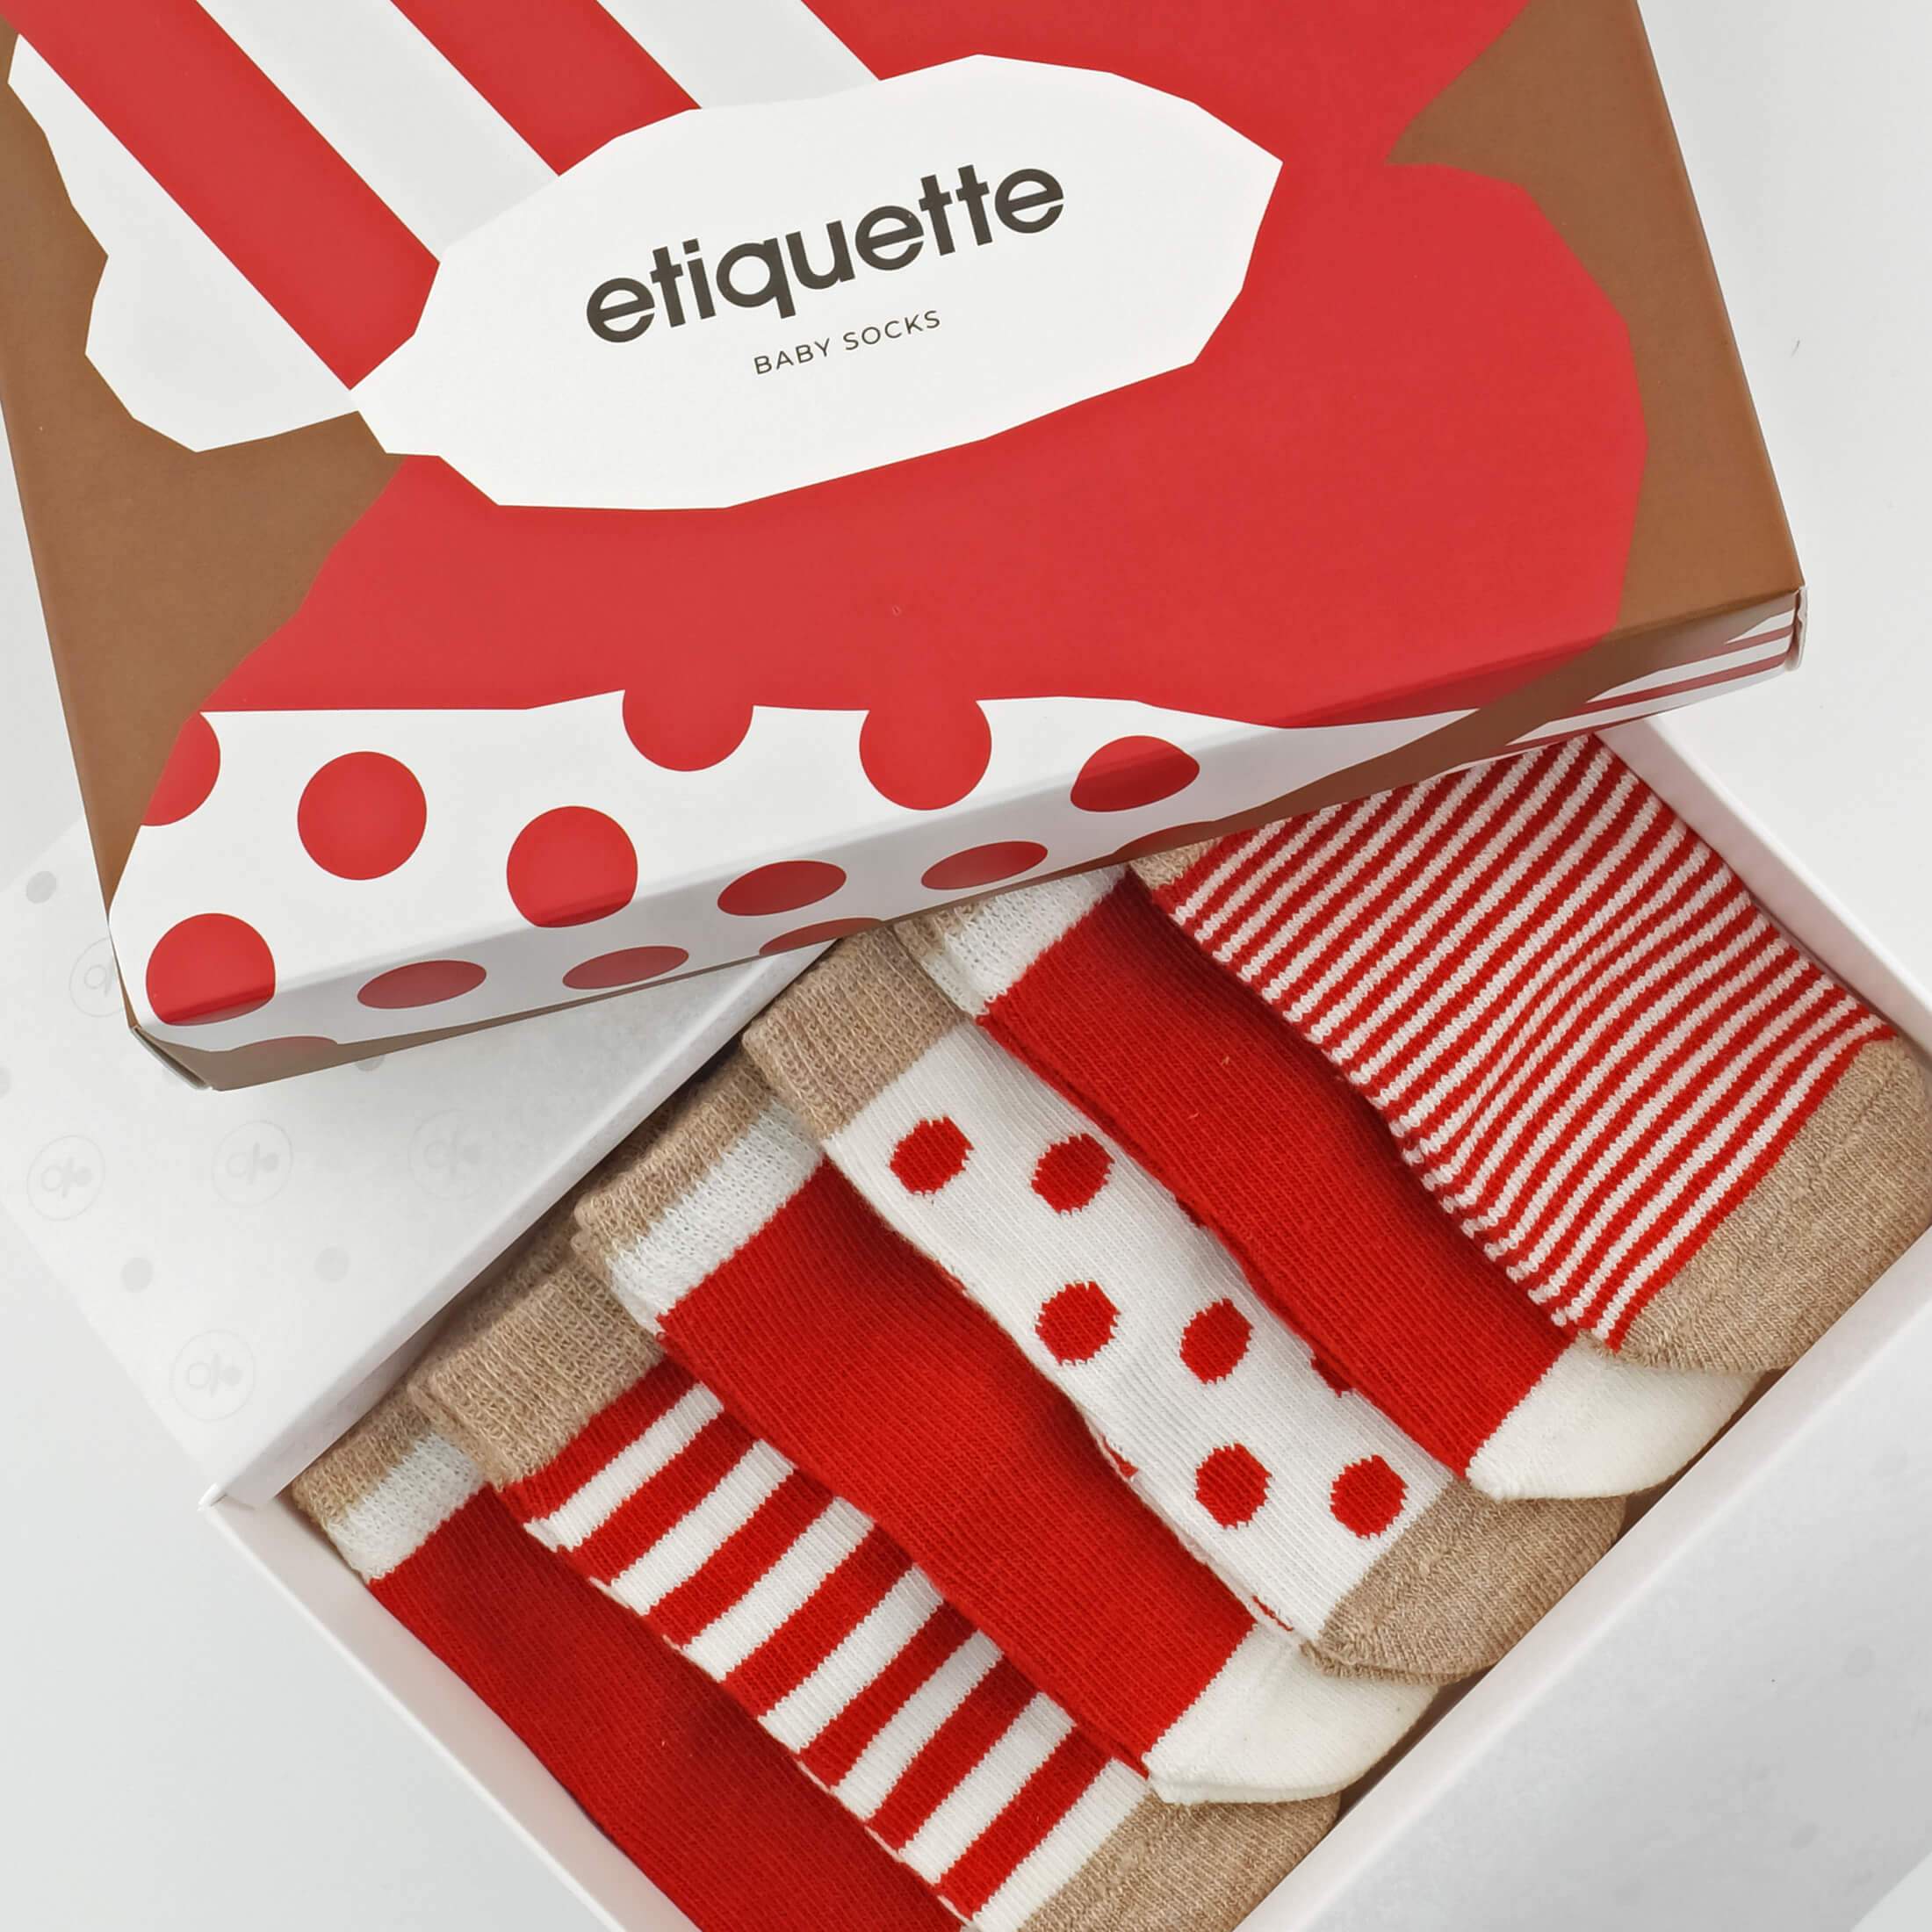 Baby Socks - Classic Earth Baby Socks Gift Box - Red Brown Ecru - top box view⎪Lil'Etiquette Clothiers